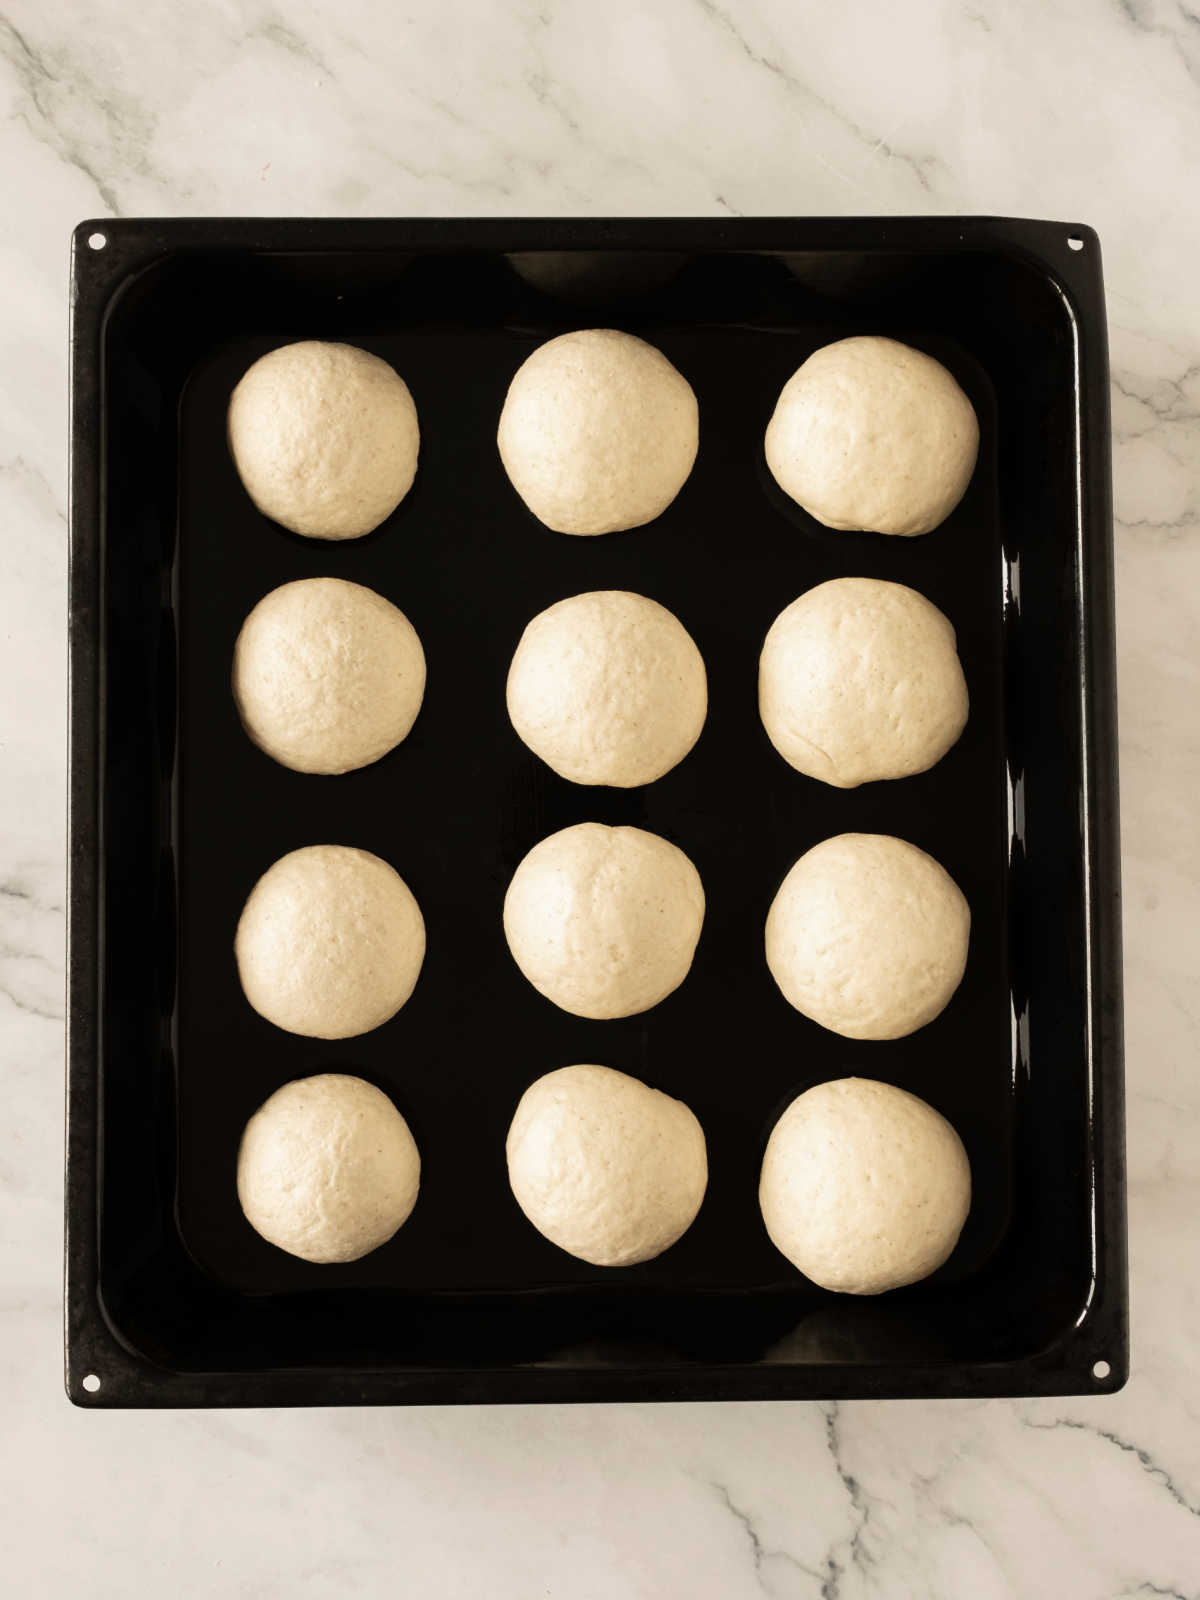 Three rows of bread dough balls on a black oven tray. White marbled surface.